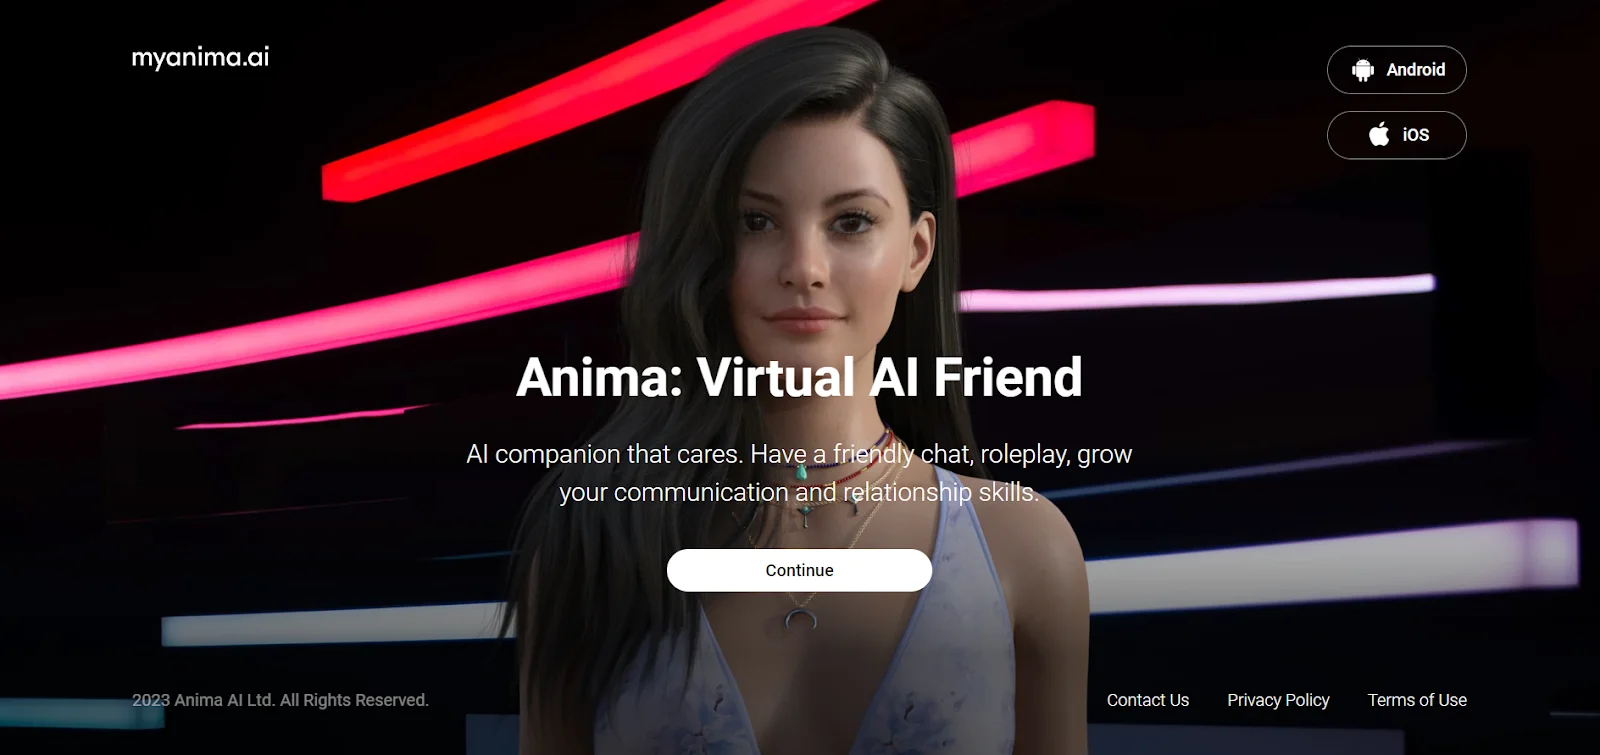 A review of Anima, an AI software for communication and entertainment